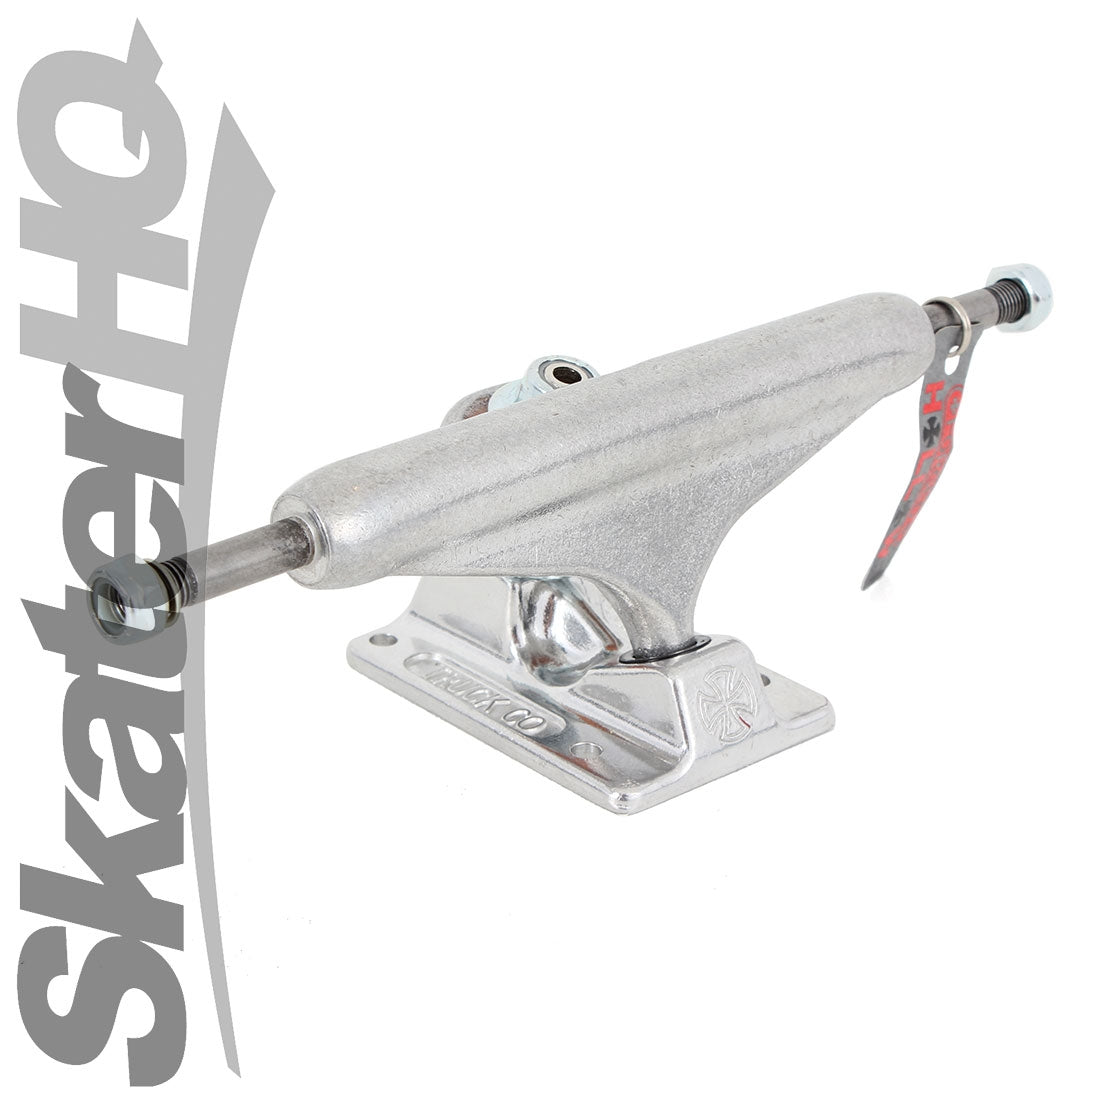 Independent 144 Forged Hollow Trucks - Silver Skateboard Trucks